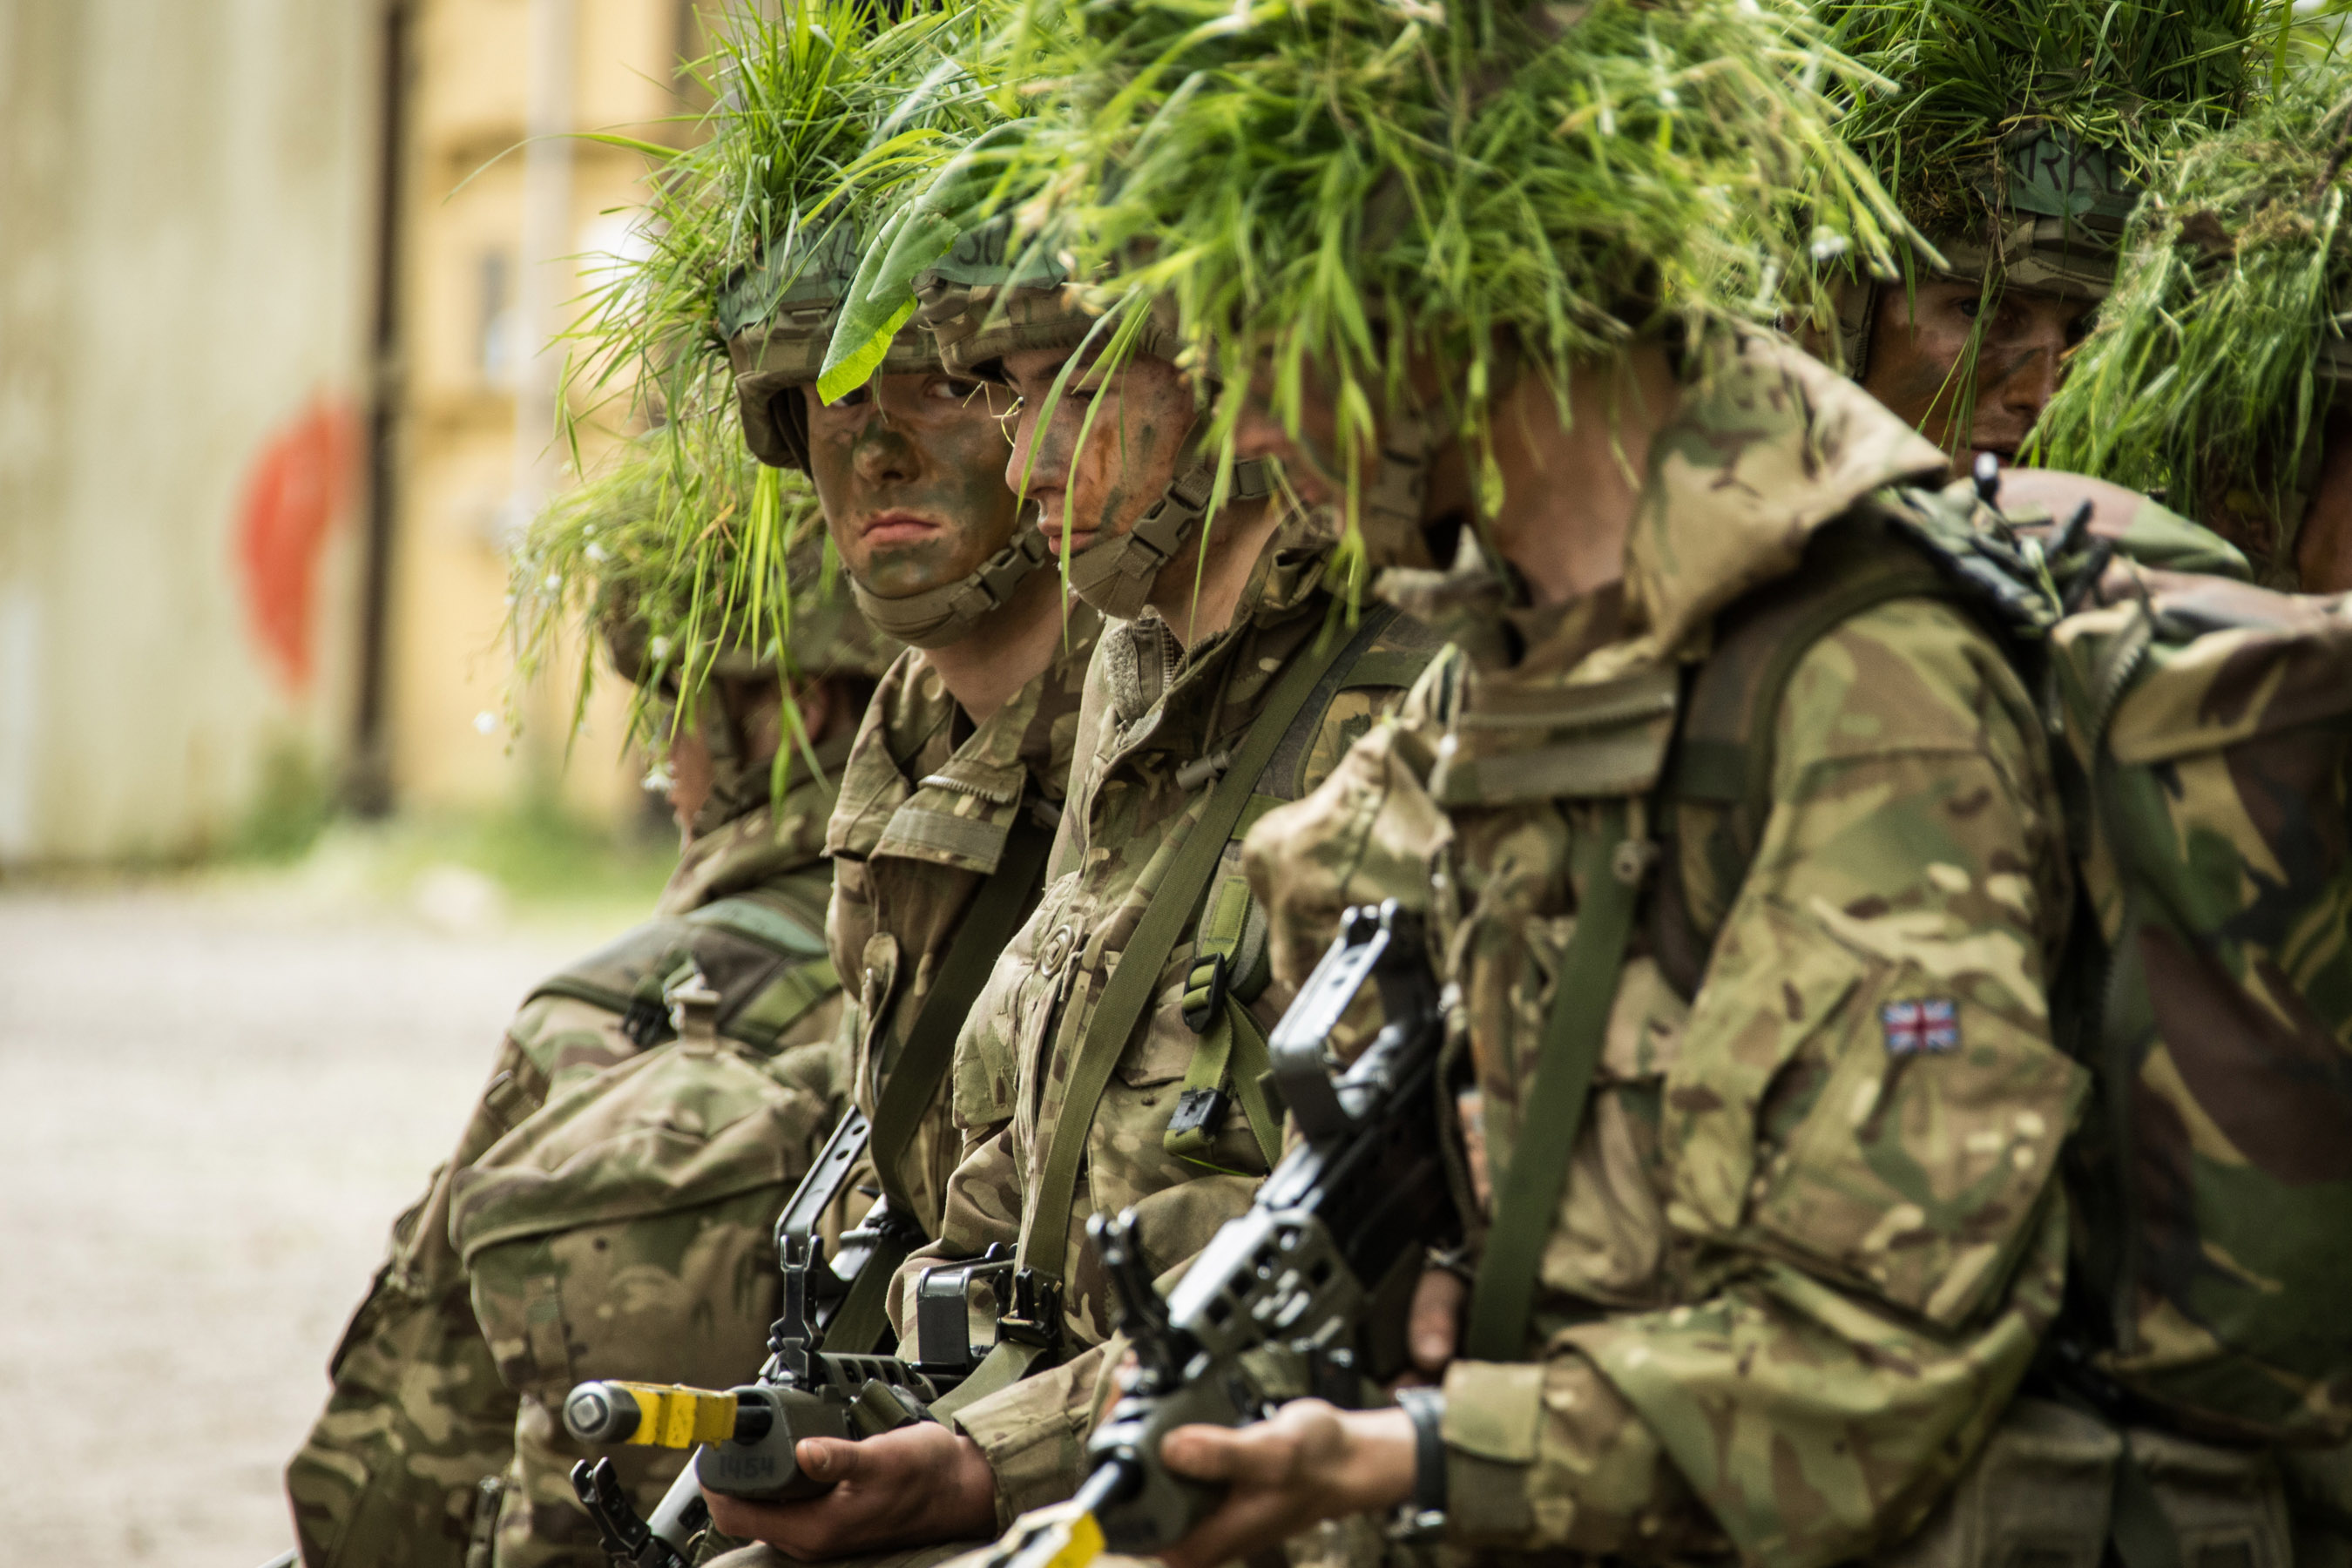 Personnel in camouflage with grass on their heads.